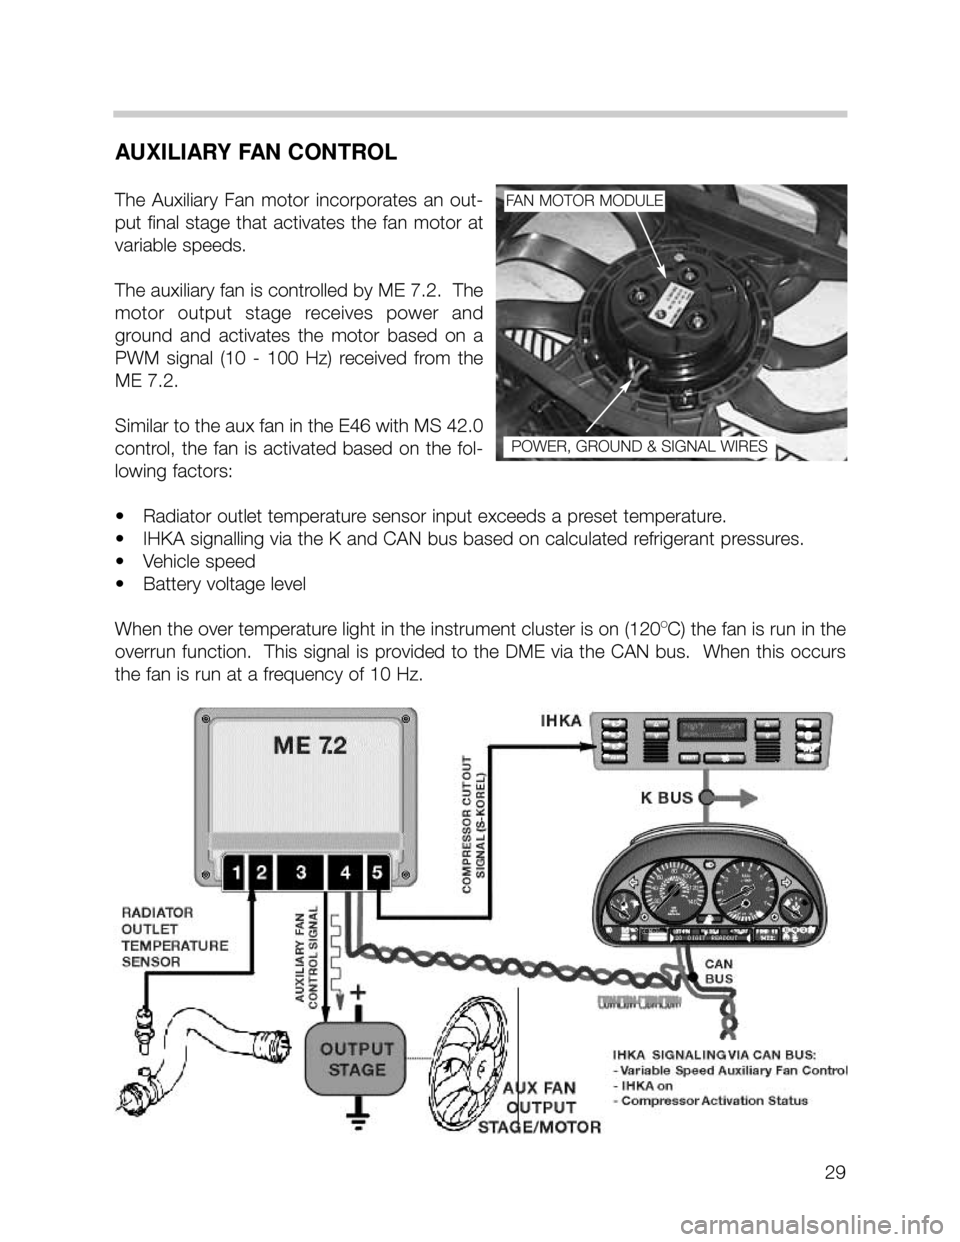 BMW X5 2006 E53 M62TU Engine Workshop Manual 29
AUXILIARY FAN CONTROL
The  Auxiliary  Fan  motor  incorporates  an  out-
put  final  stage  that  activates  the  fan  motor  at
variable speeds.  
The auxiliary fan is controlled by ME 7.2.  The
m